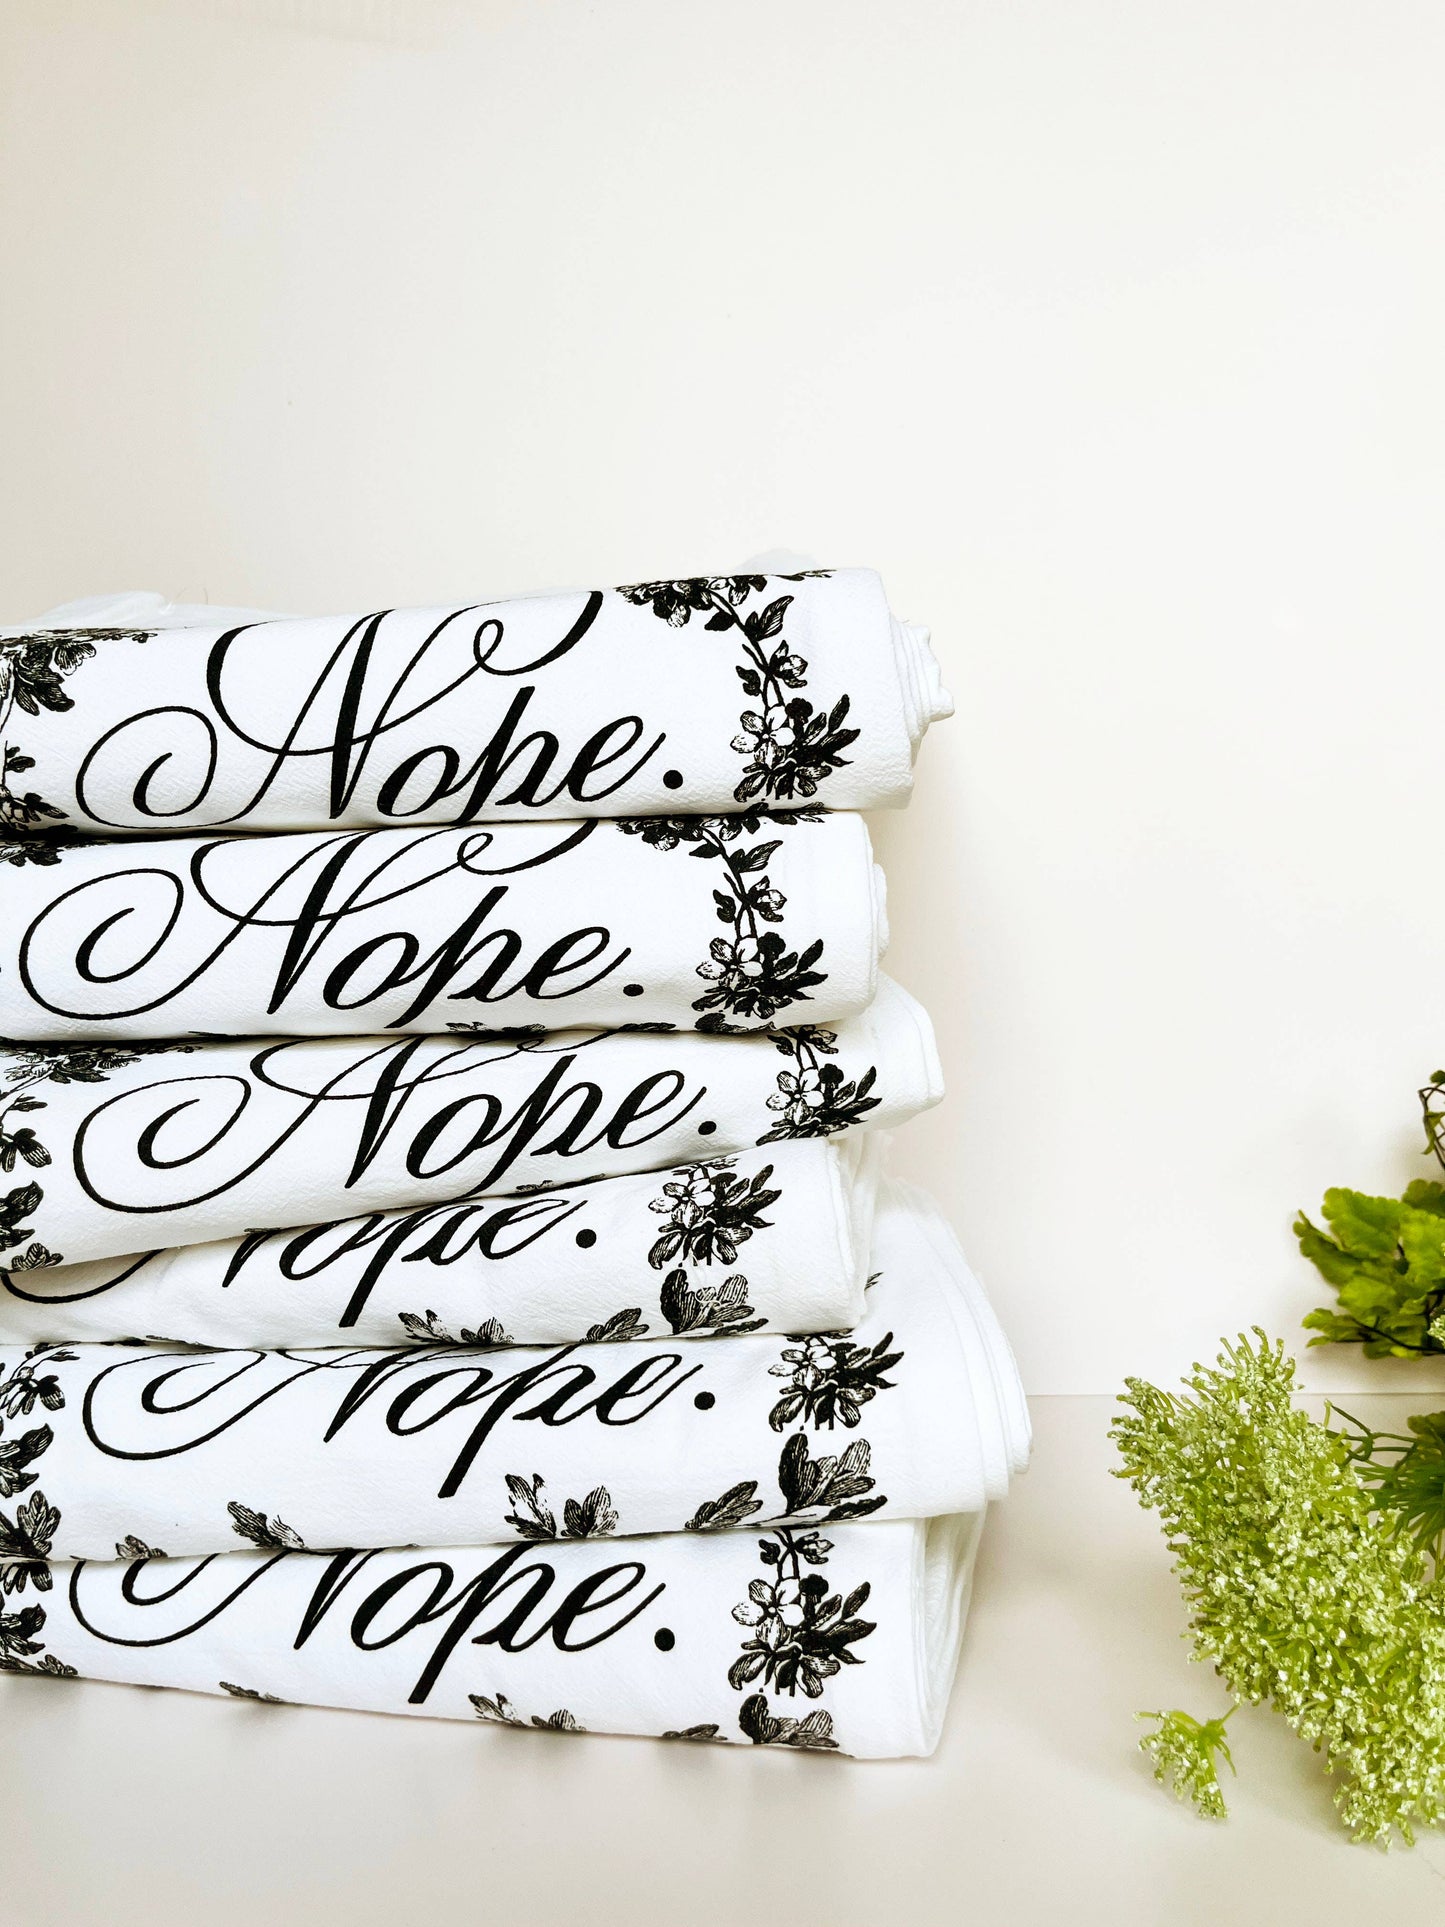 Nope Funny Cotton Kitchen Towel - Cute Home Decor